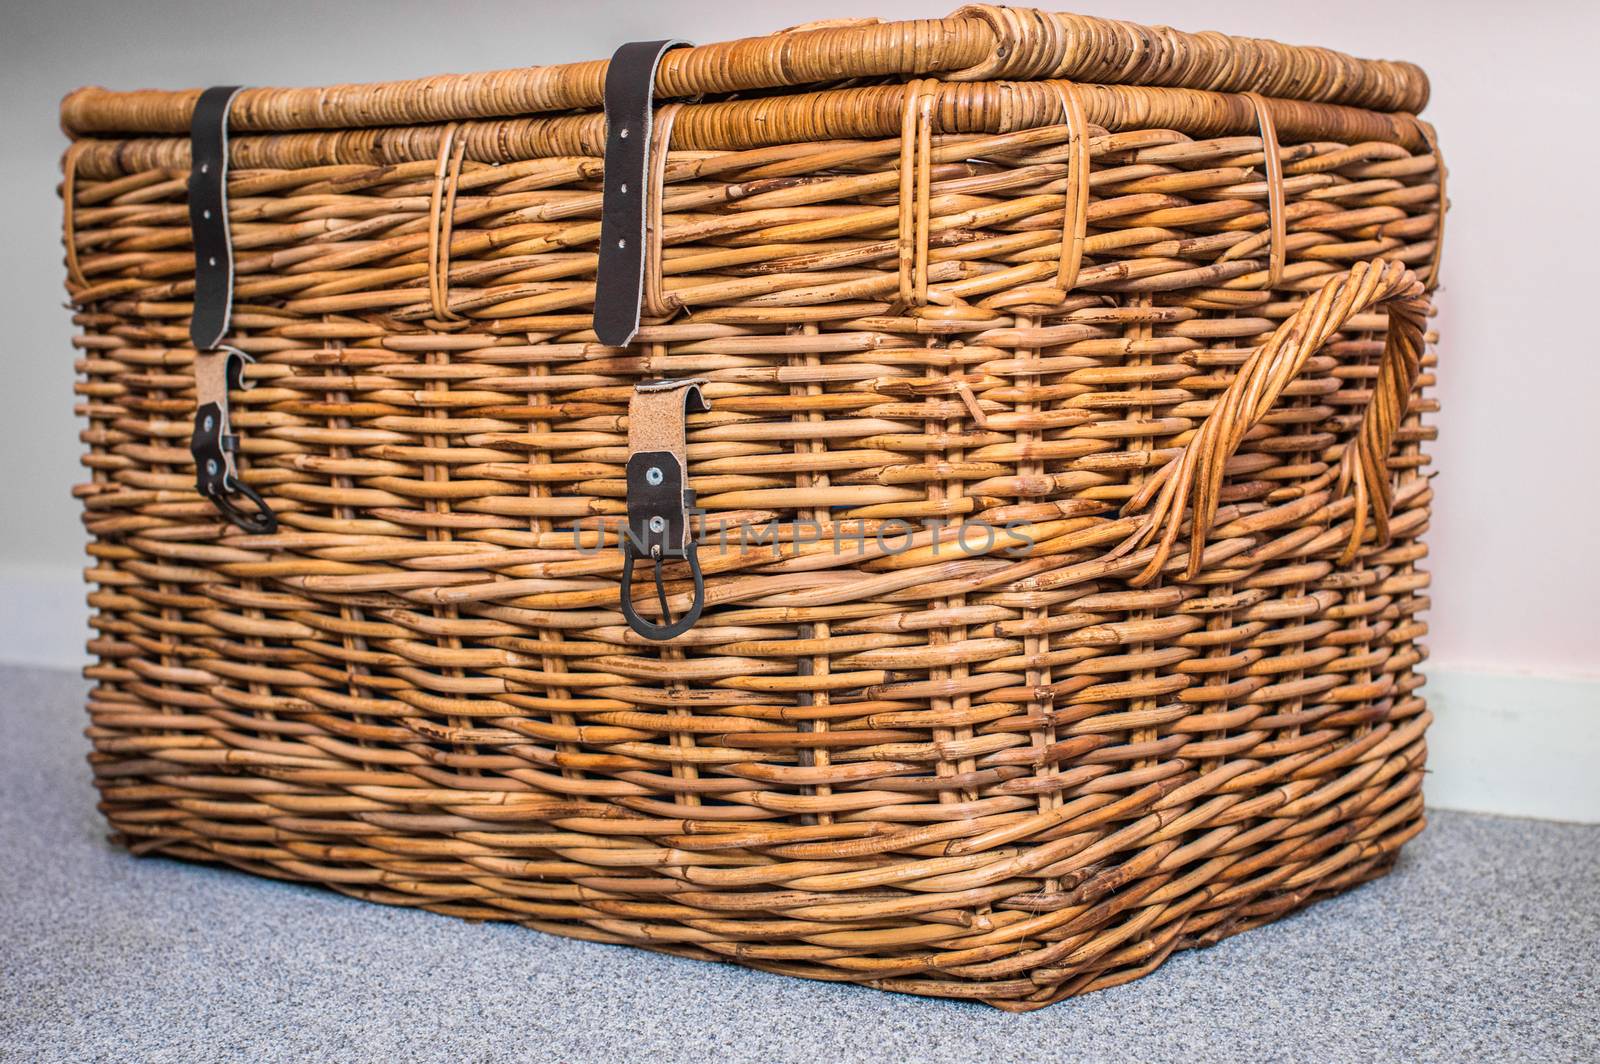 Wicker basket on the light background in the room